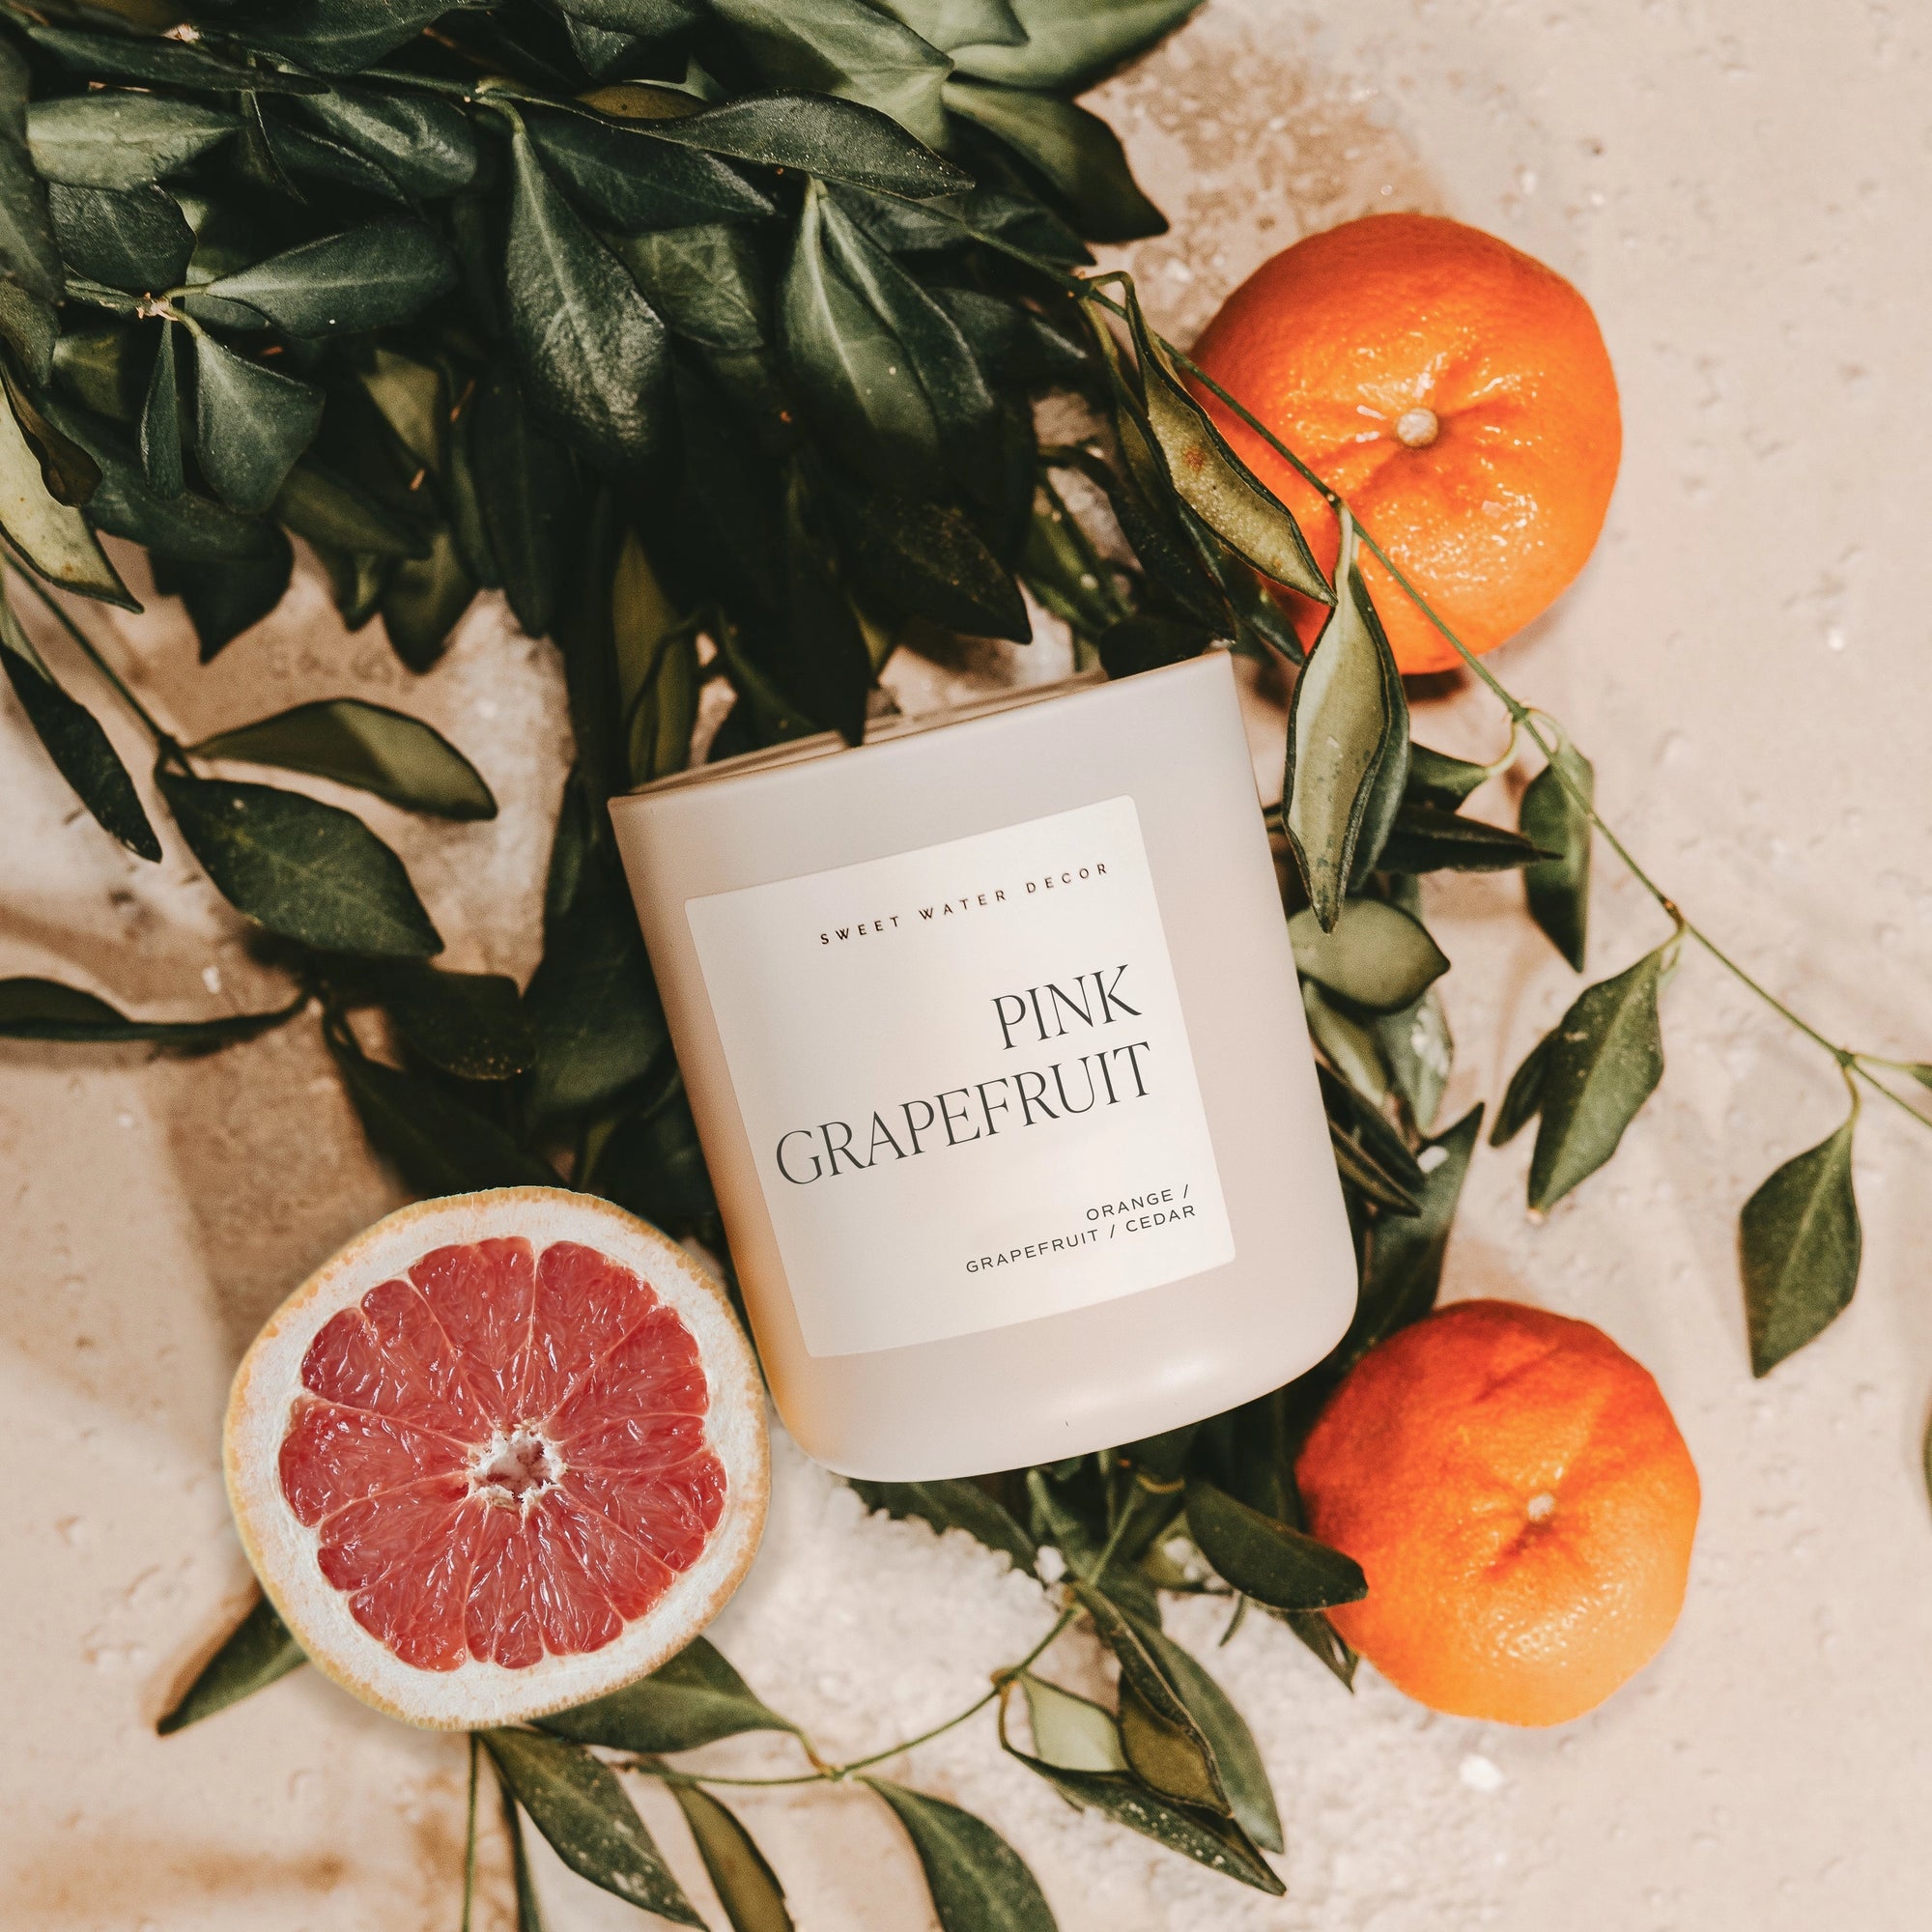 Pink grapefruit soy candle in matte white jar, with leaves and grapefruits.